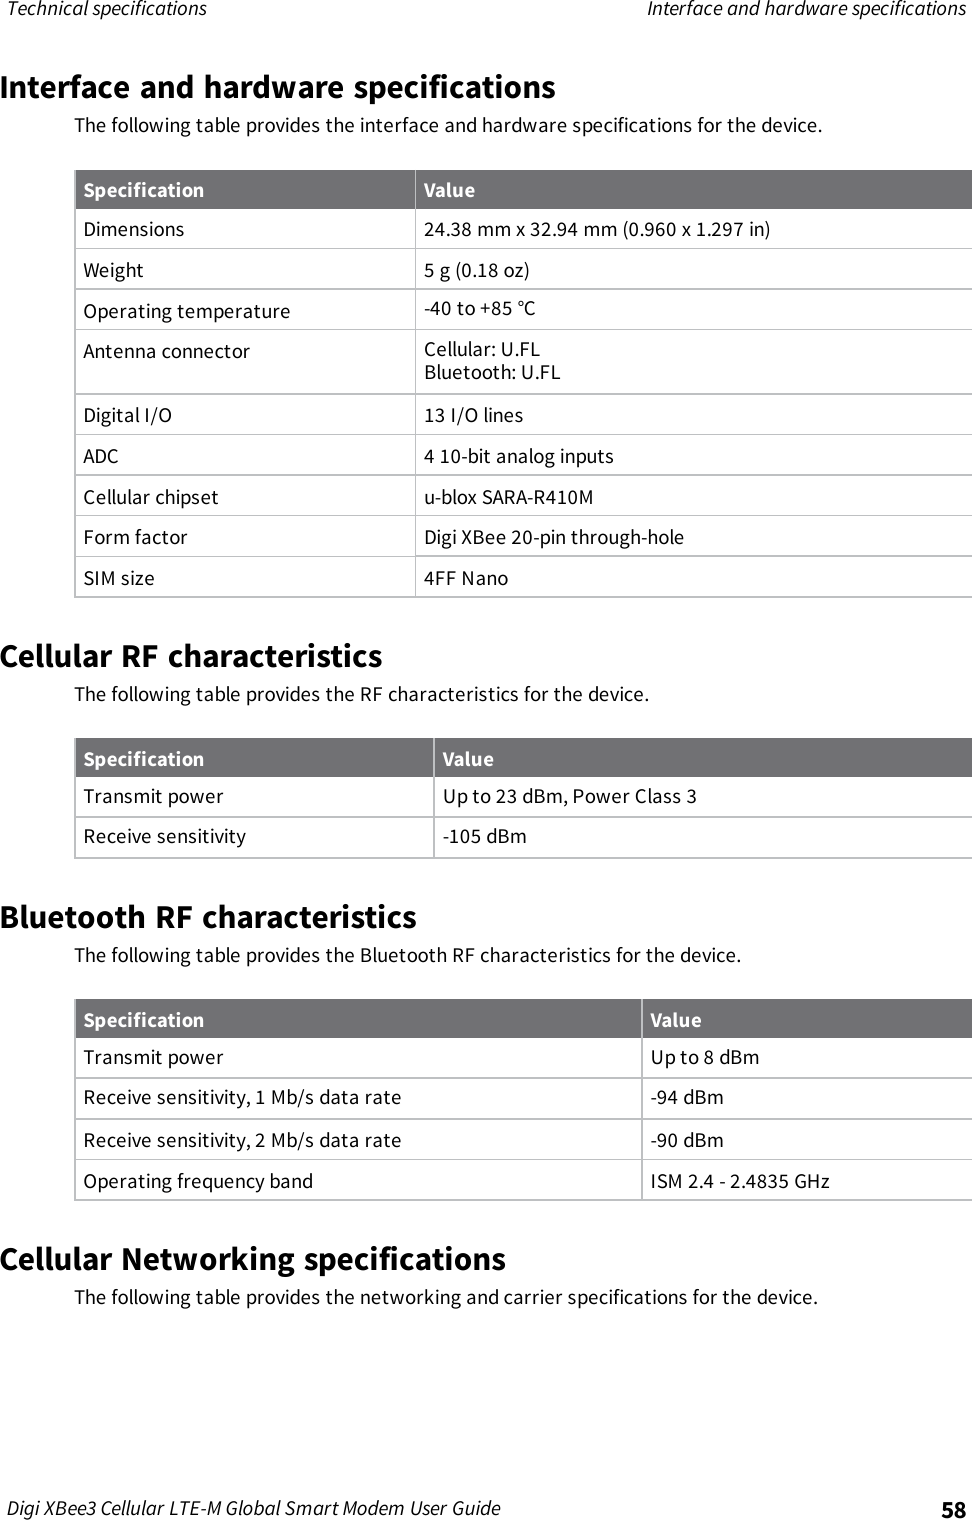 Page 58 of Digi XB3M1 XBee3 Cellular LTE-M User Manual 